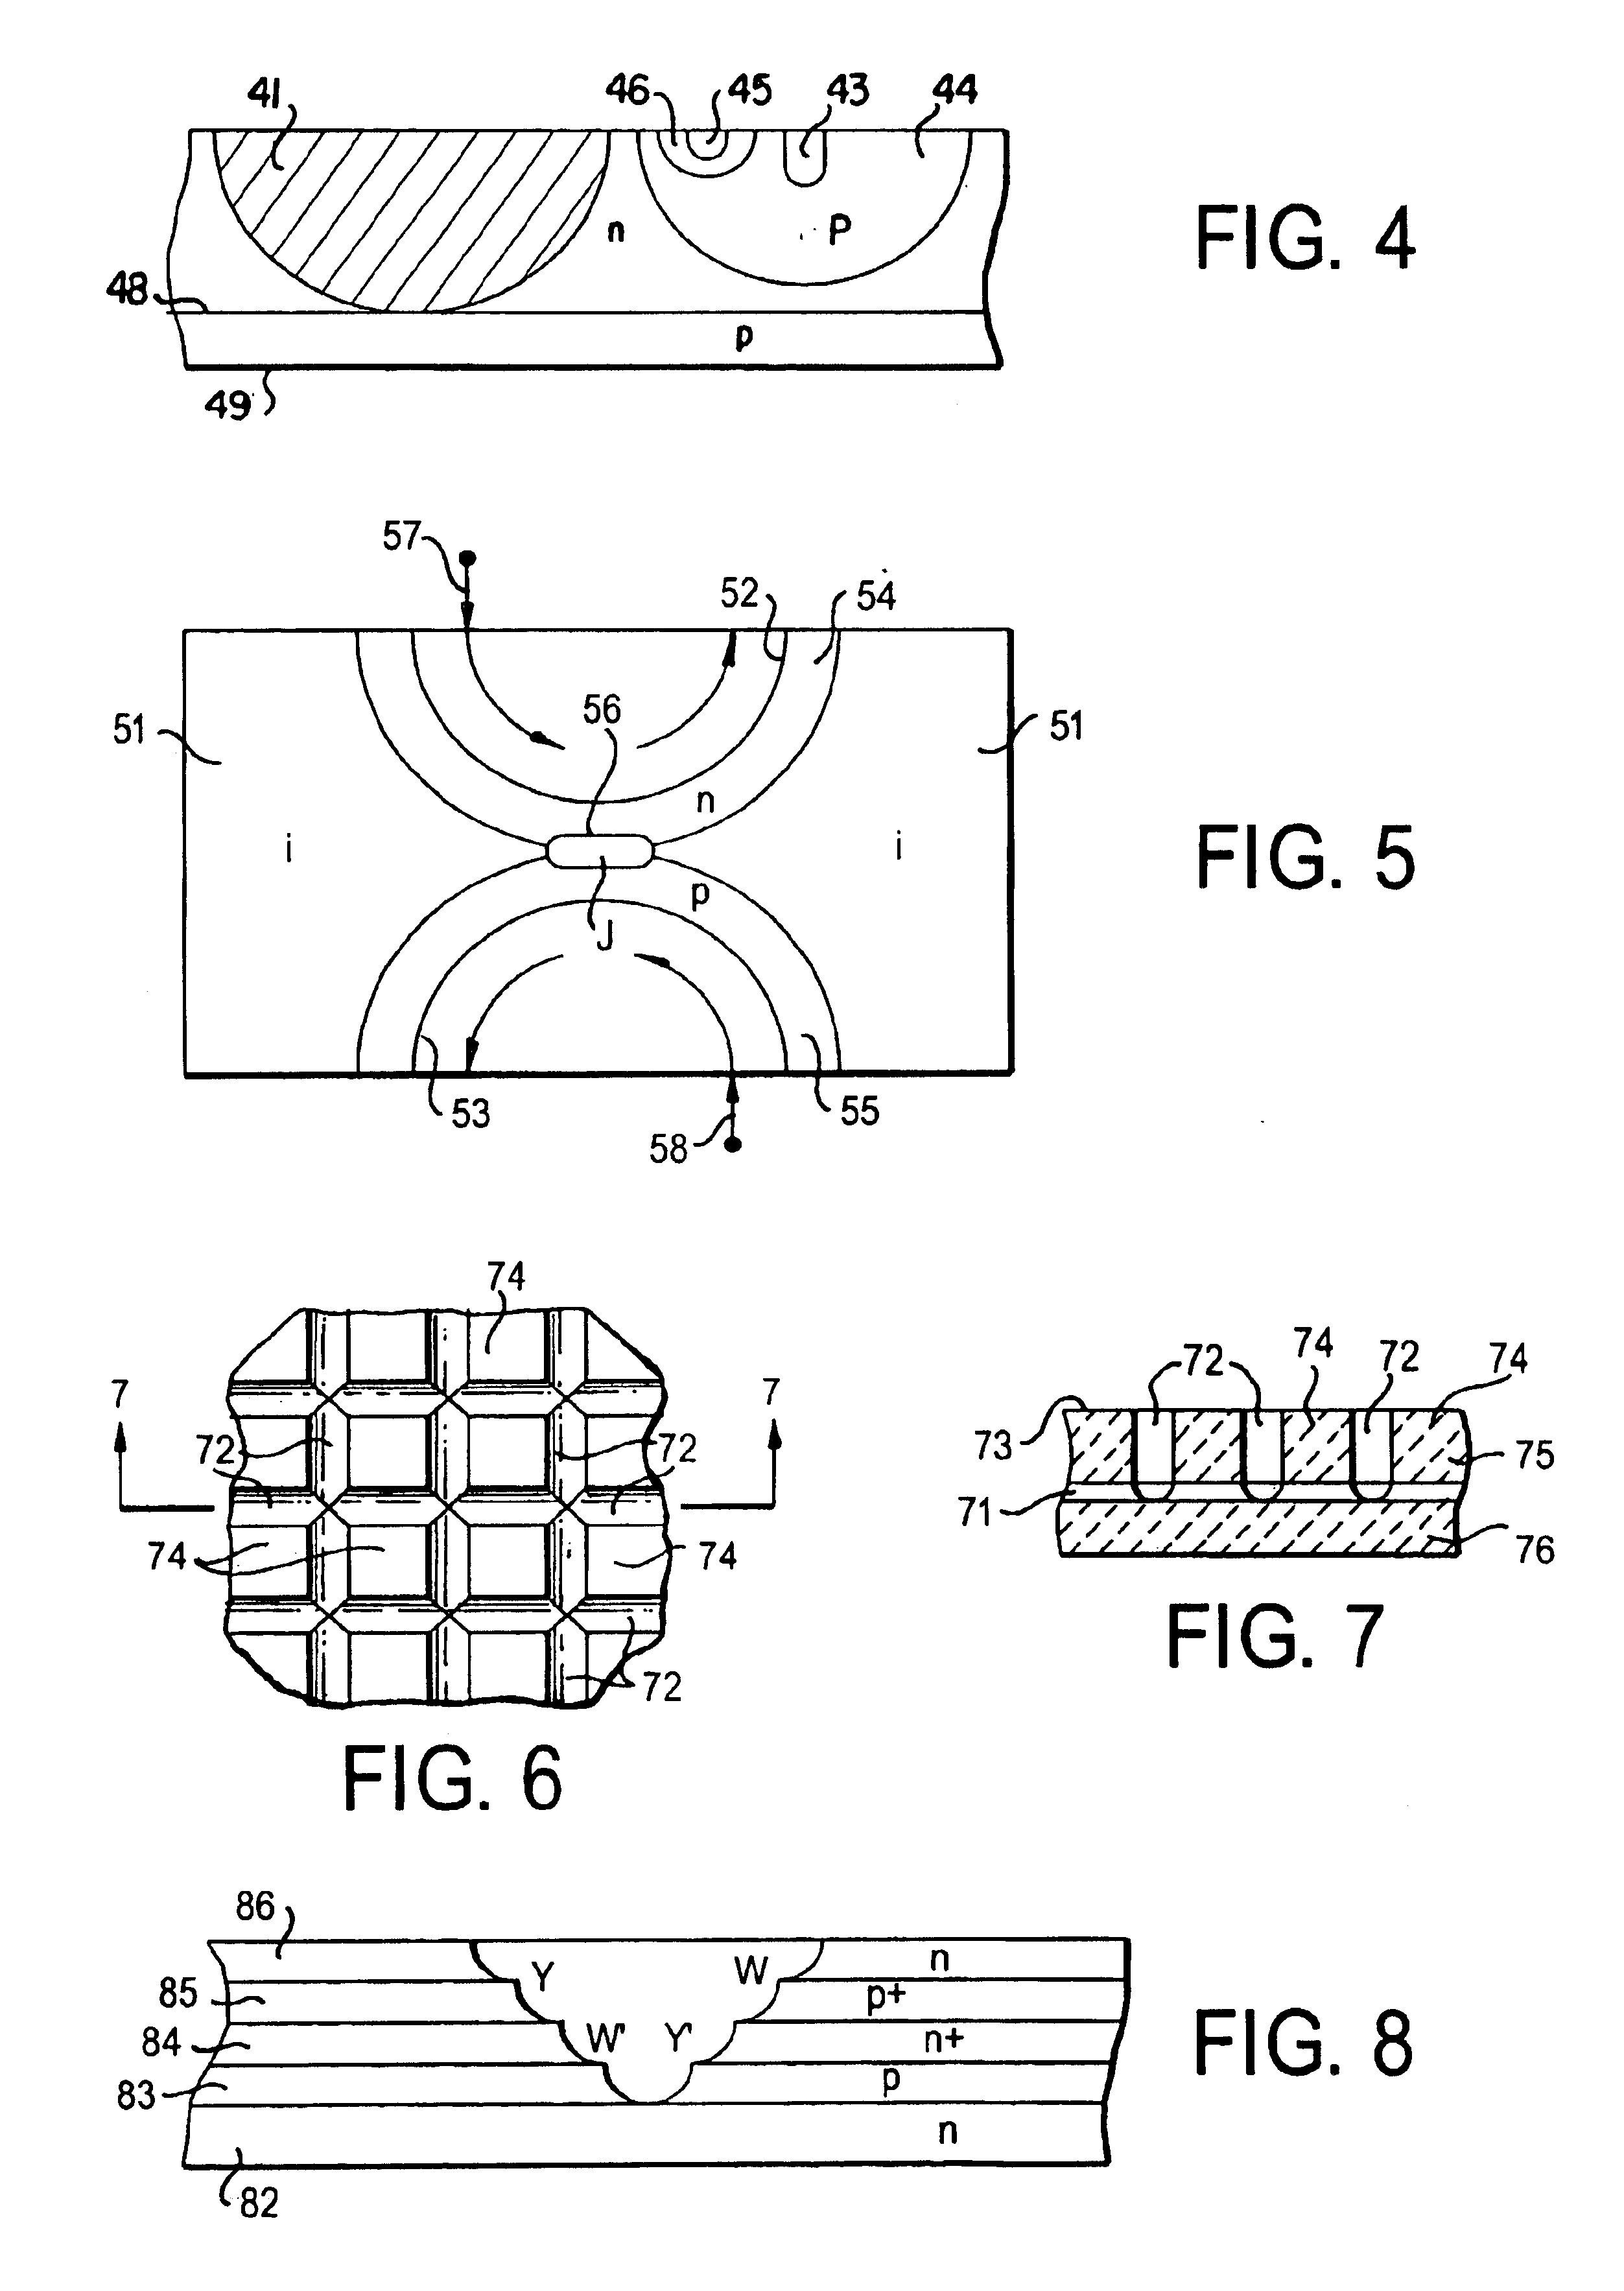 Miniaturized dielectrically isolated solid state device